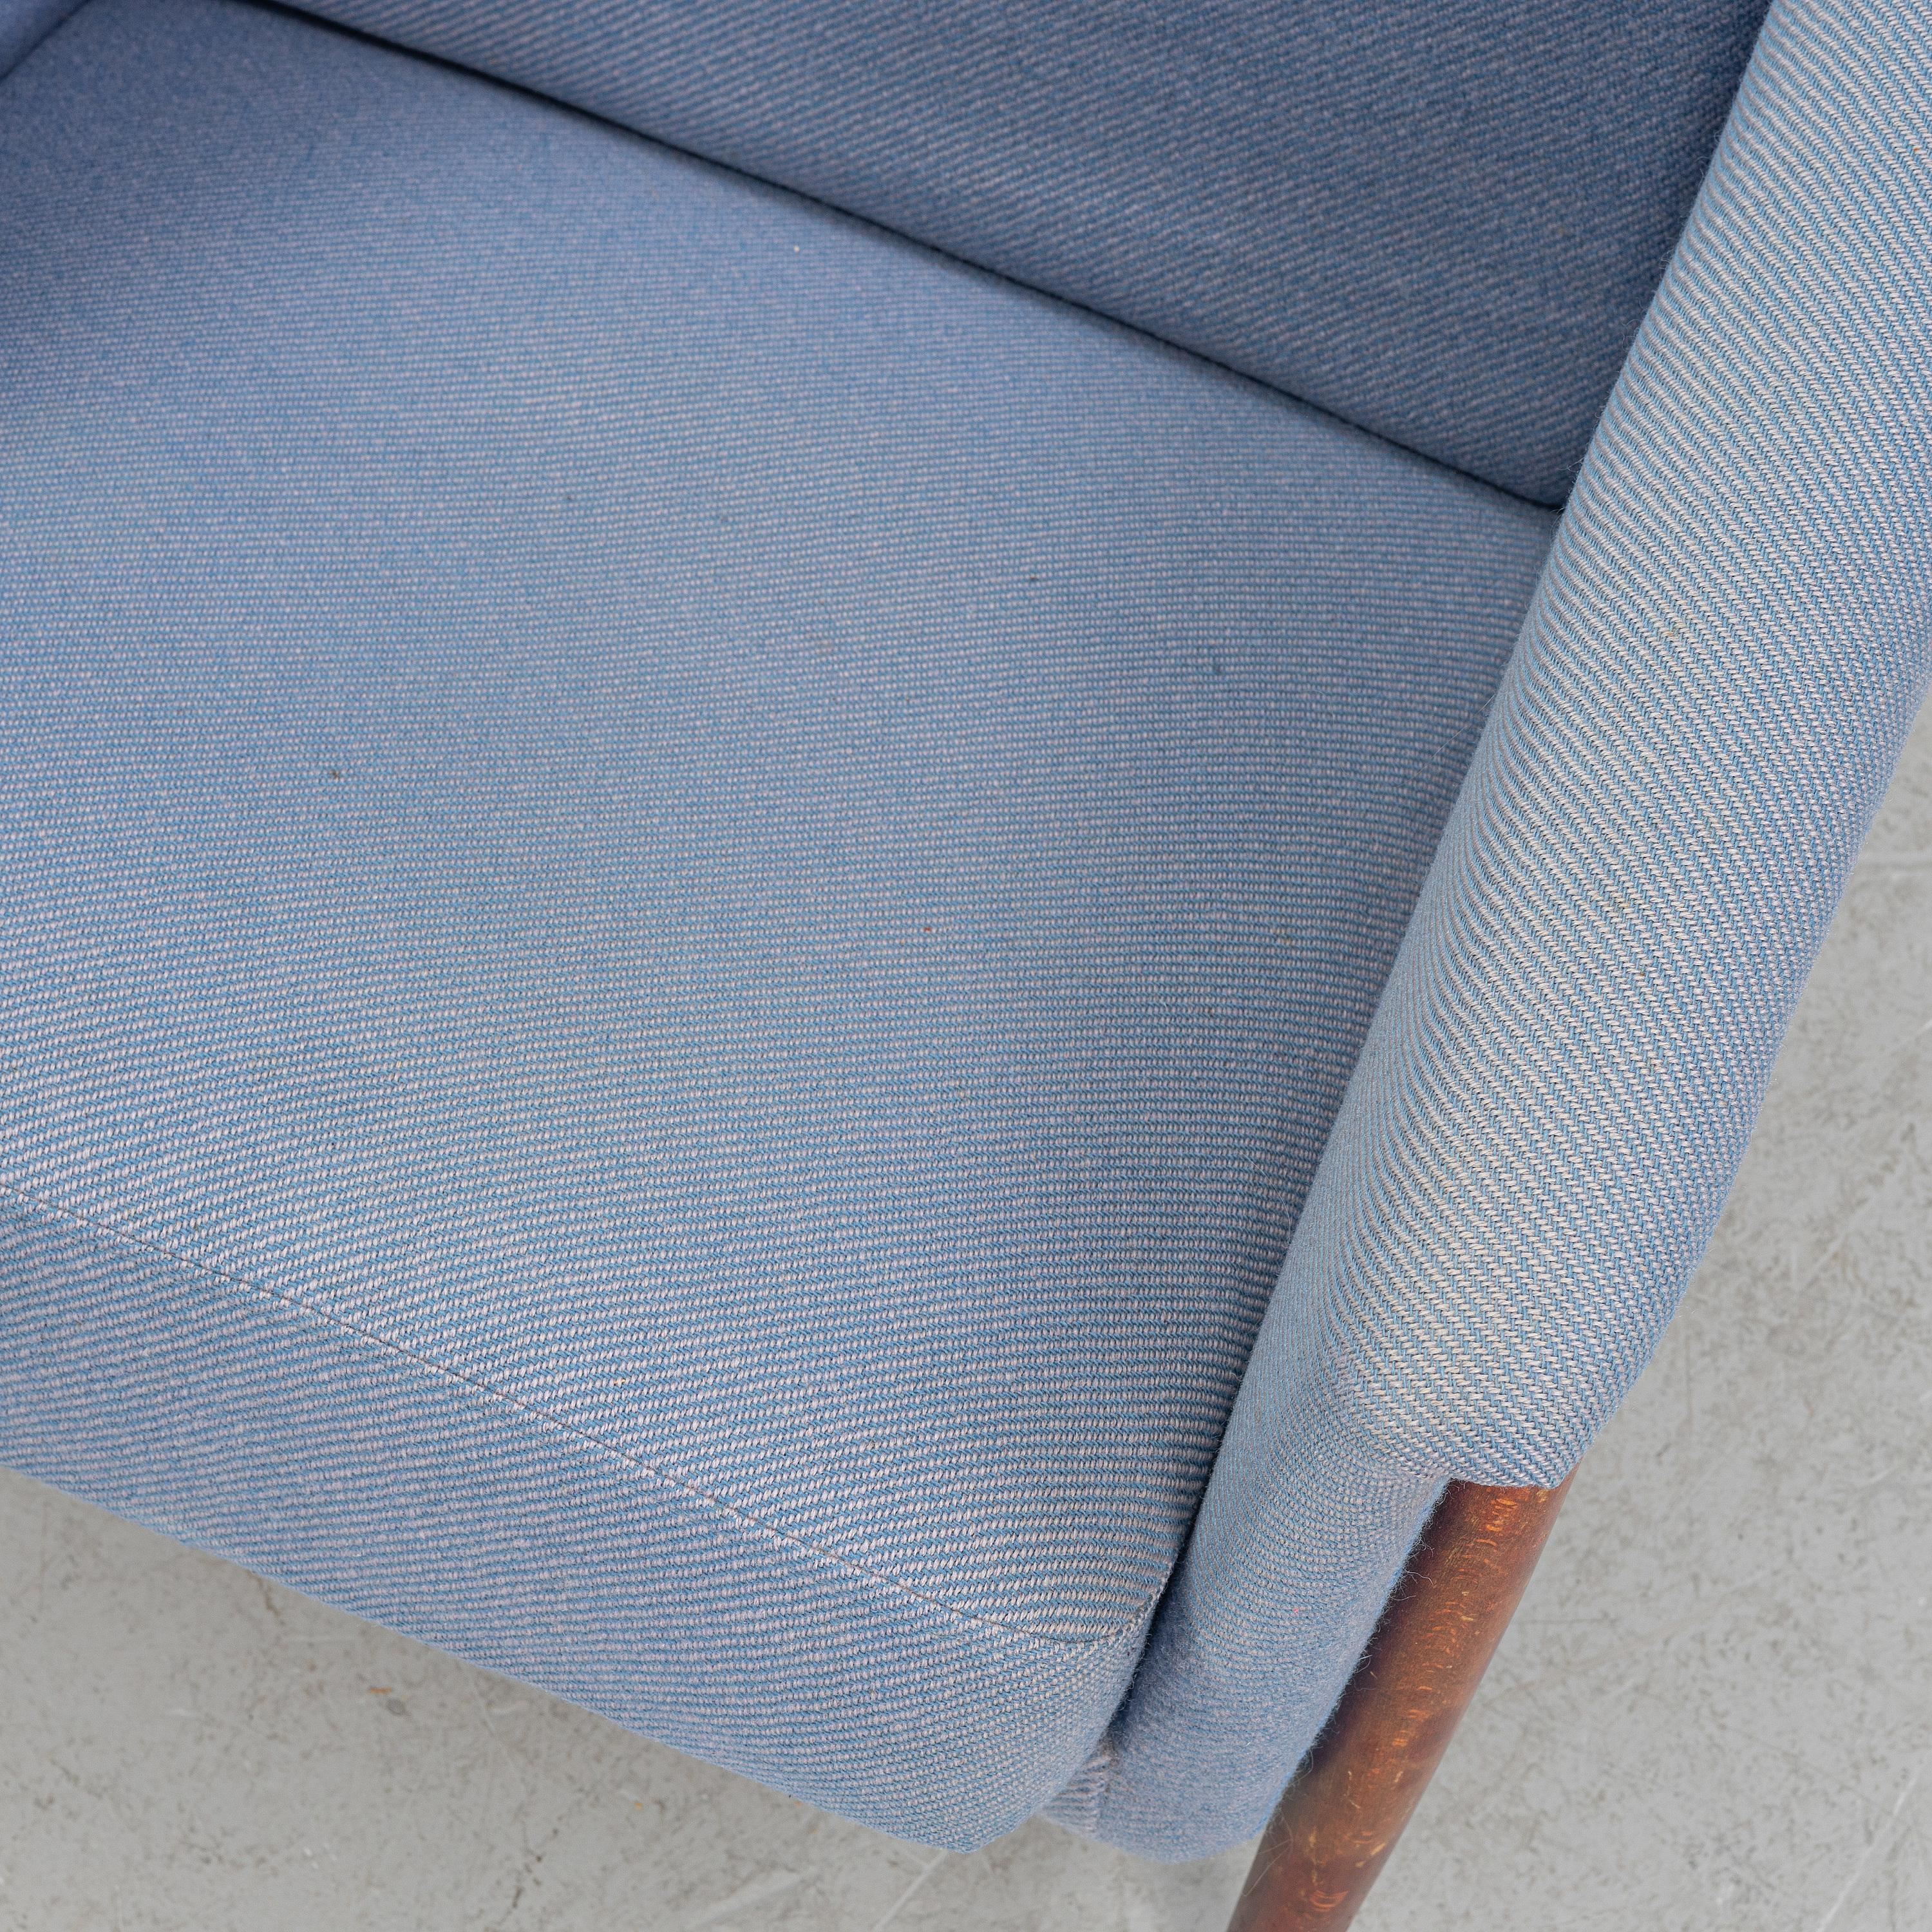 'Scania'' armchair designed by Folke Ohlsson for Dux in Sweden around 1960 .Manufactured in Stained Beech, brass and upholstery. Good condition with original light blue fabric . 
Folke Ohlsson was a Swedish designer considered one of the most